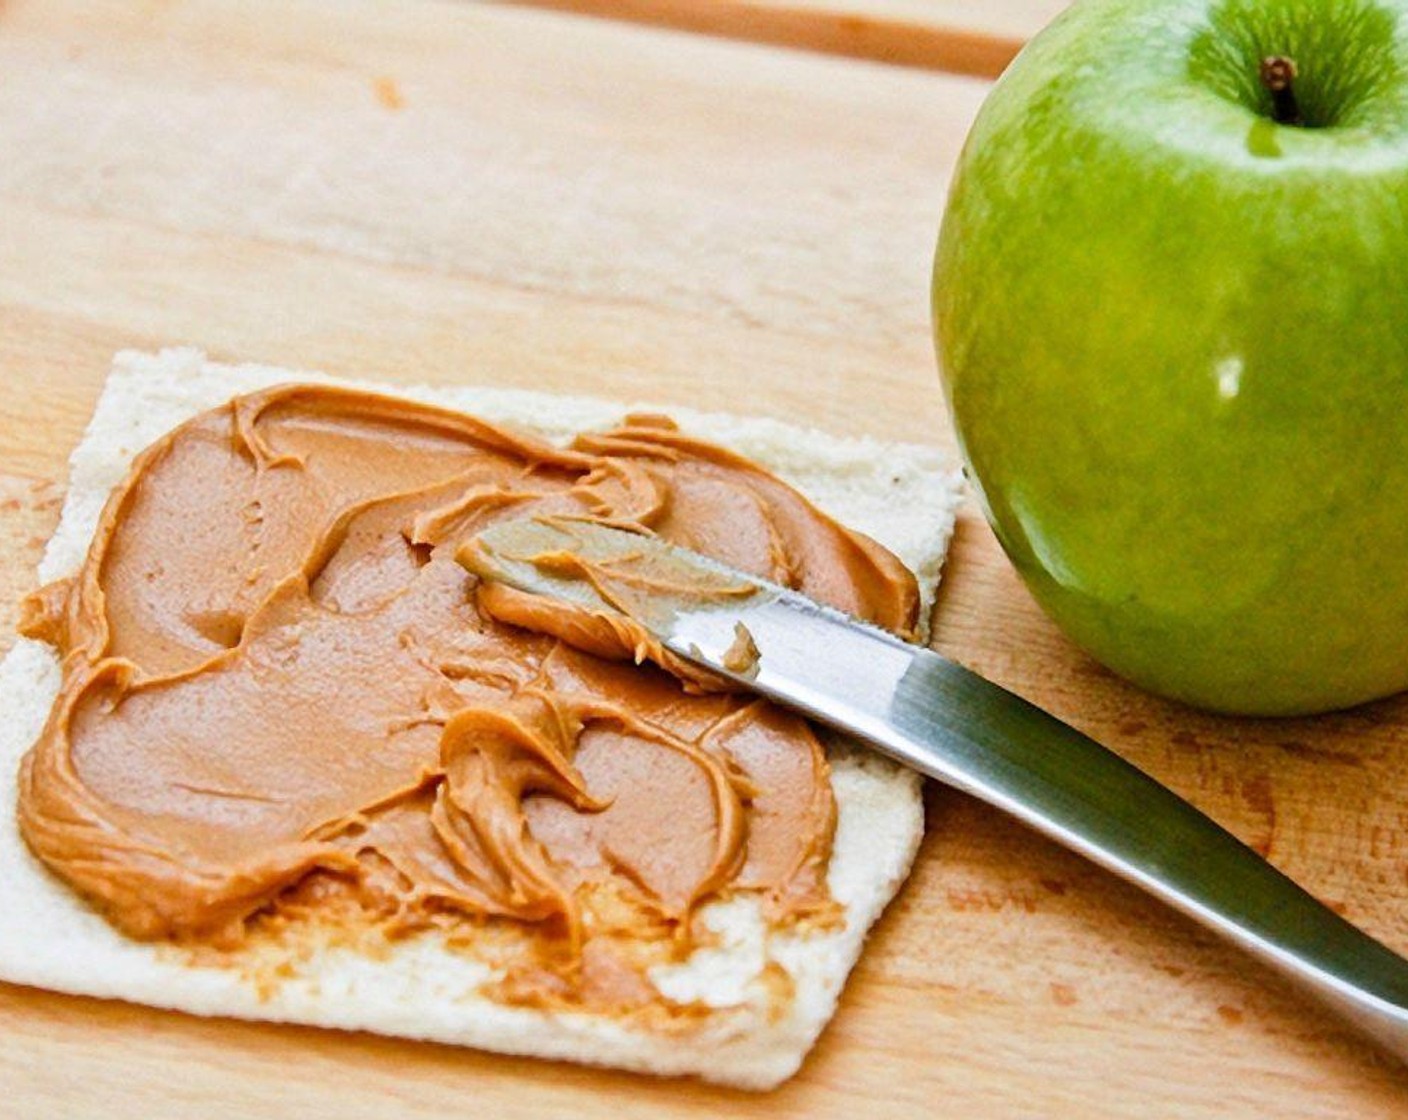 step 7 For the third combination, use peanut butter and green apple. Spread the Peanut Butter (2 Tbsp) onto a slice of bread.